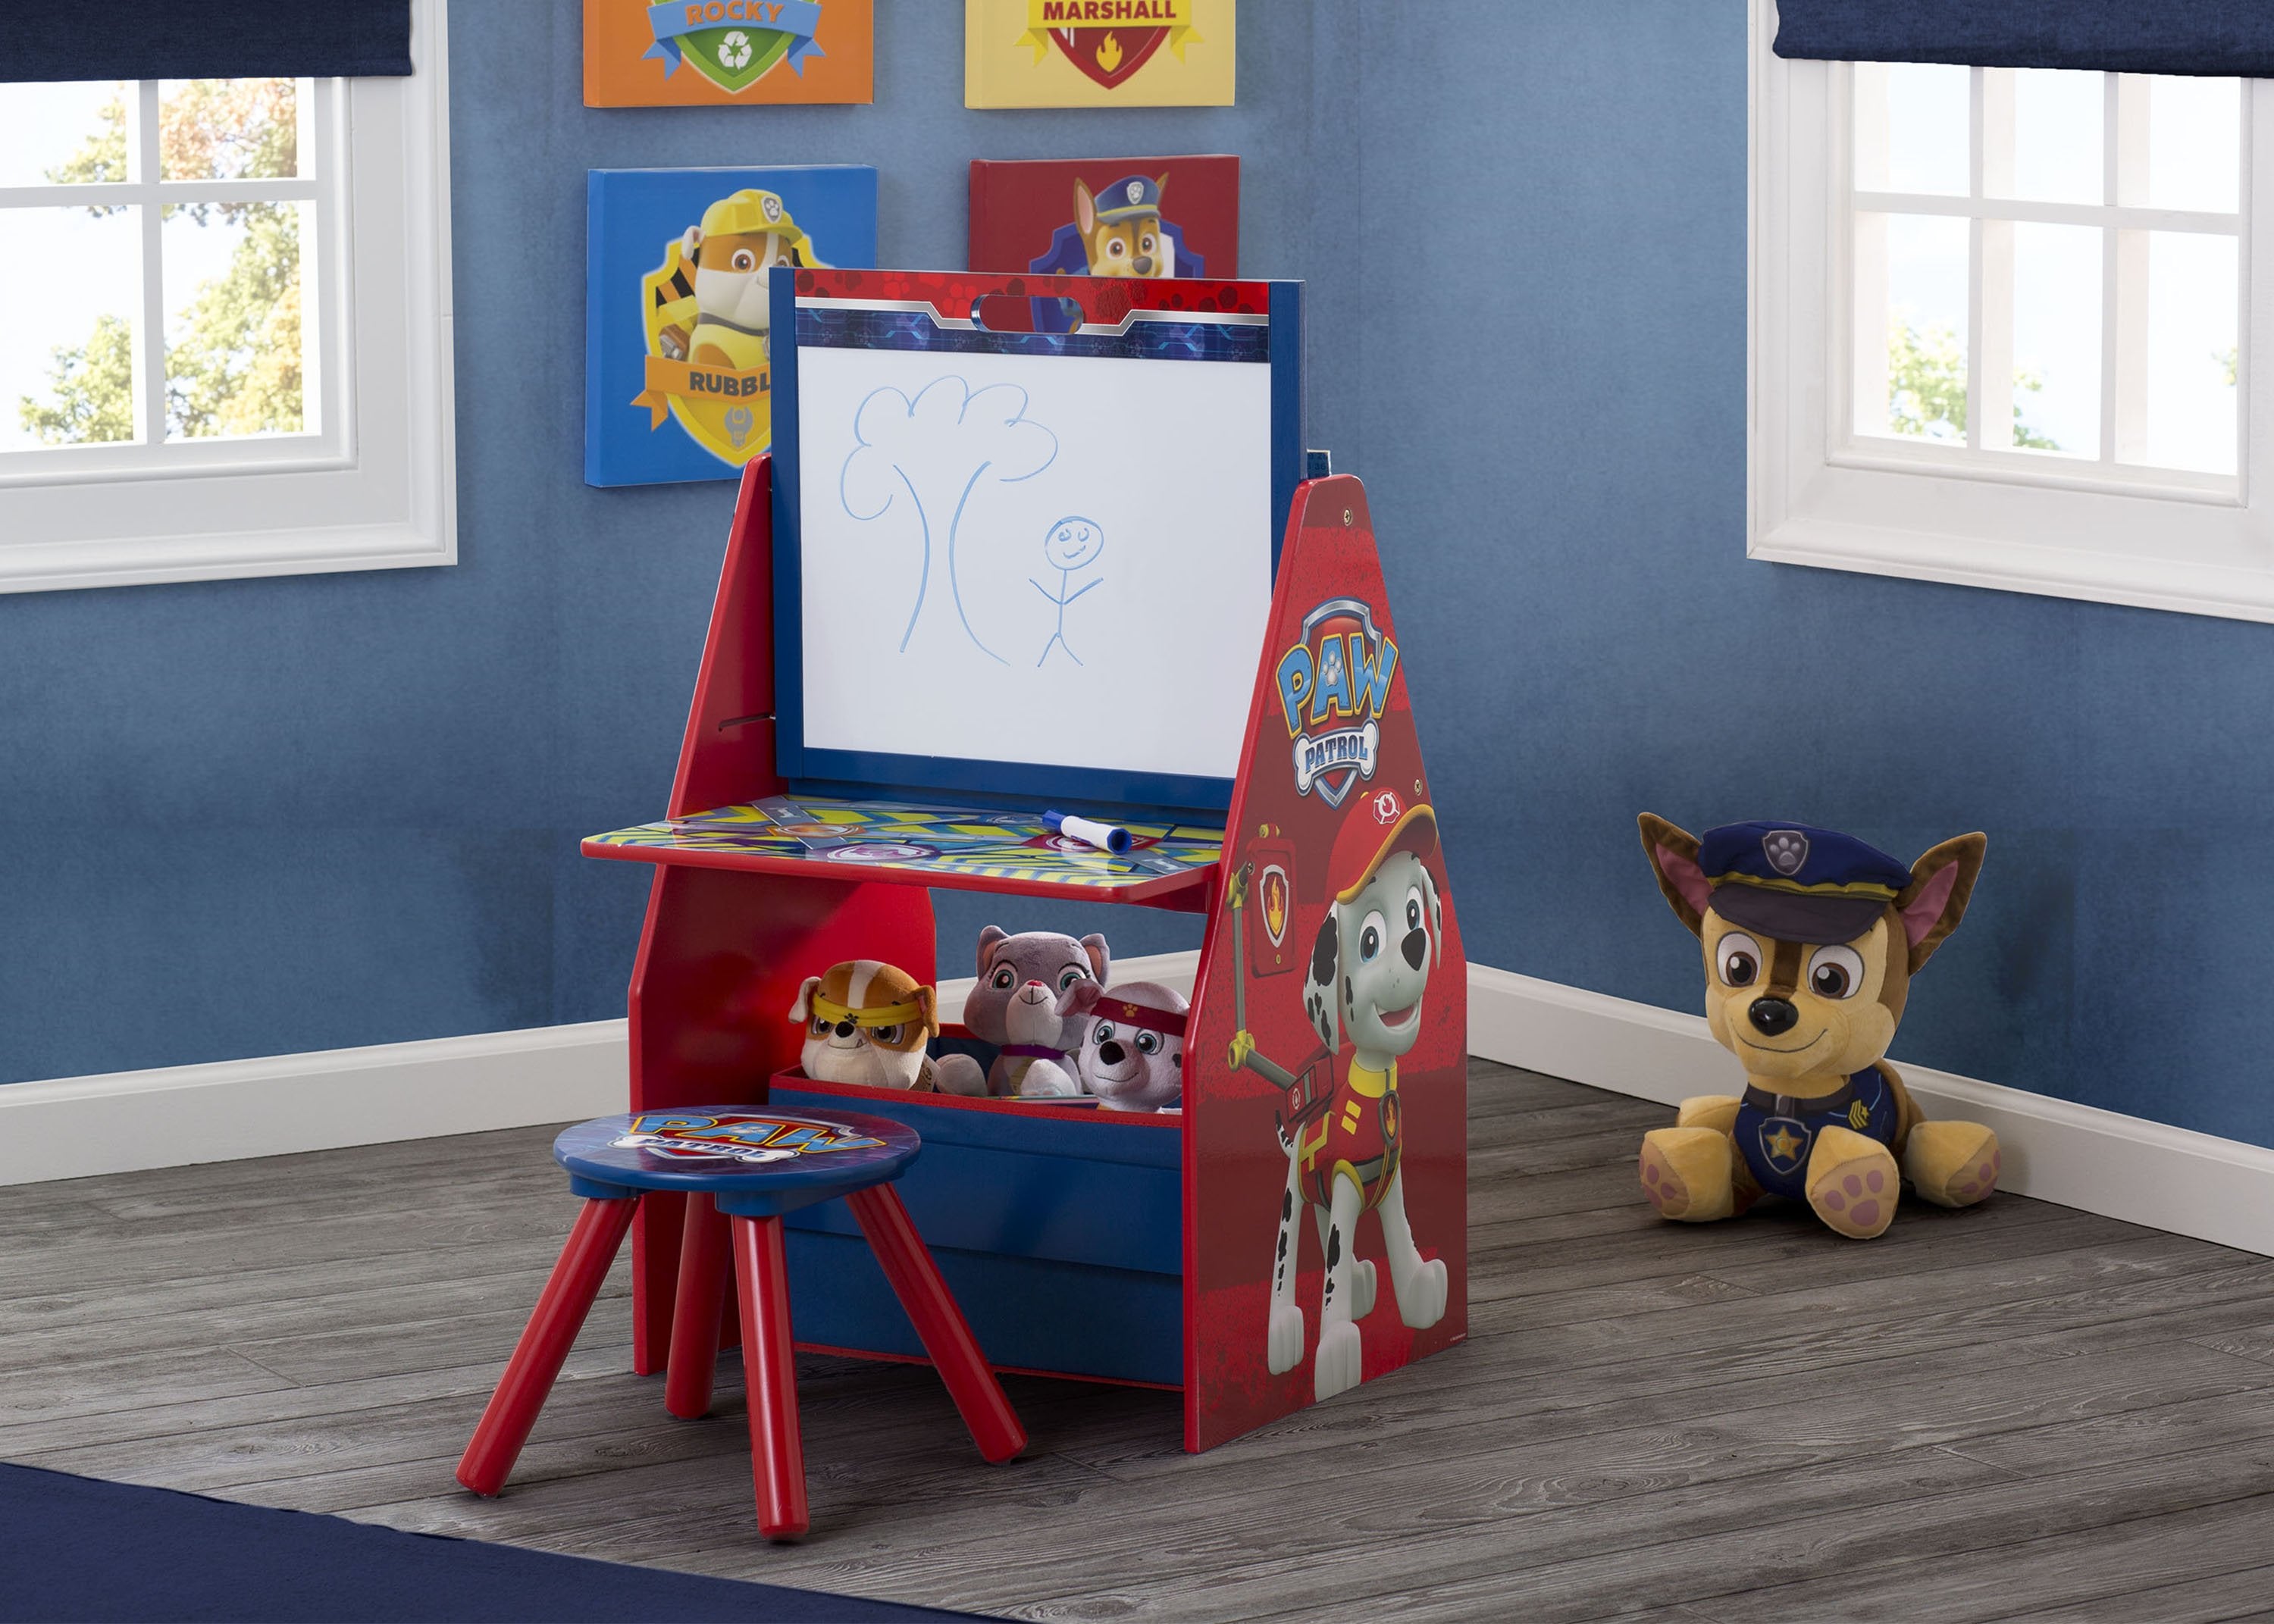 KIDS ART DESK EASEL PLAY STATIONS PAW PATROL, JUNGLE THEME or PRINCESS -  toys & games - by owner - sale - craigslist